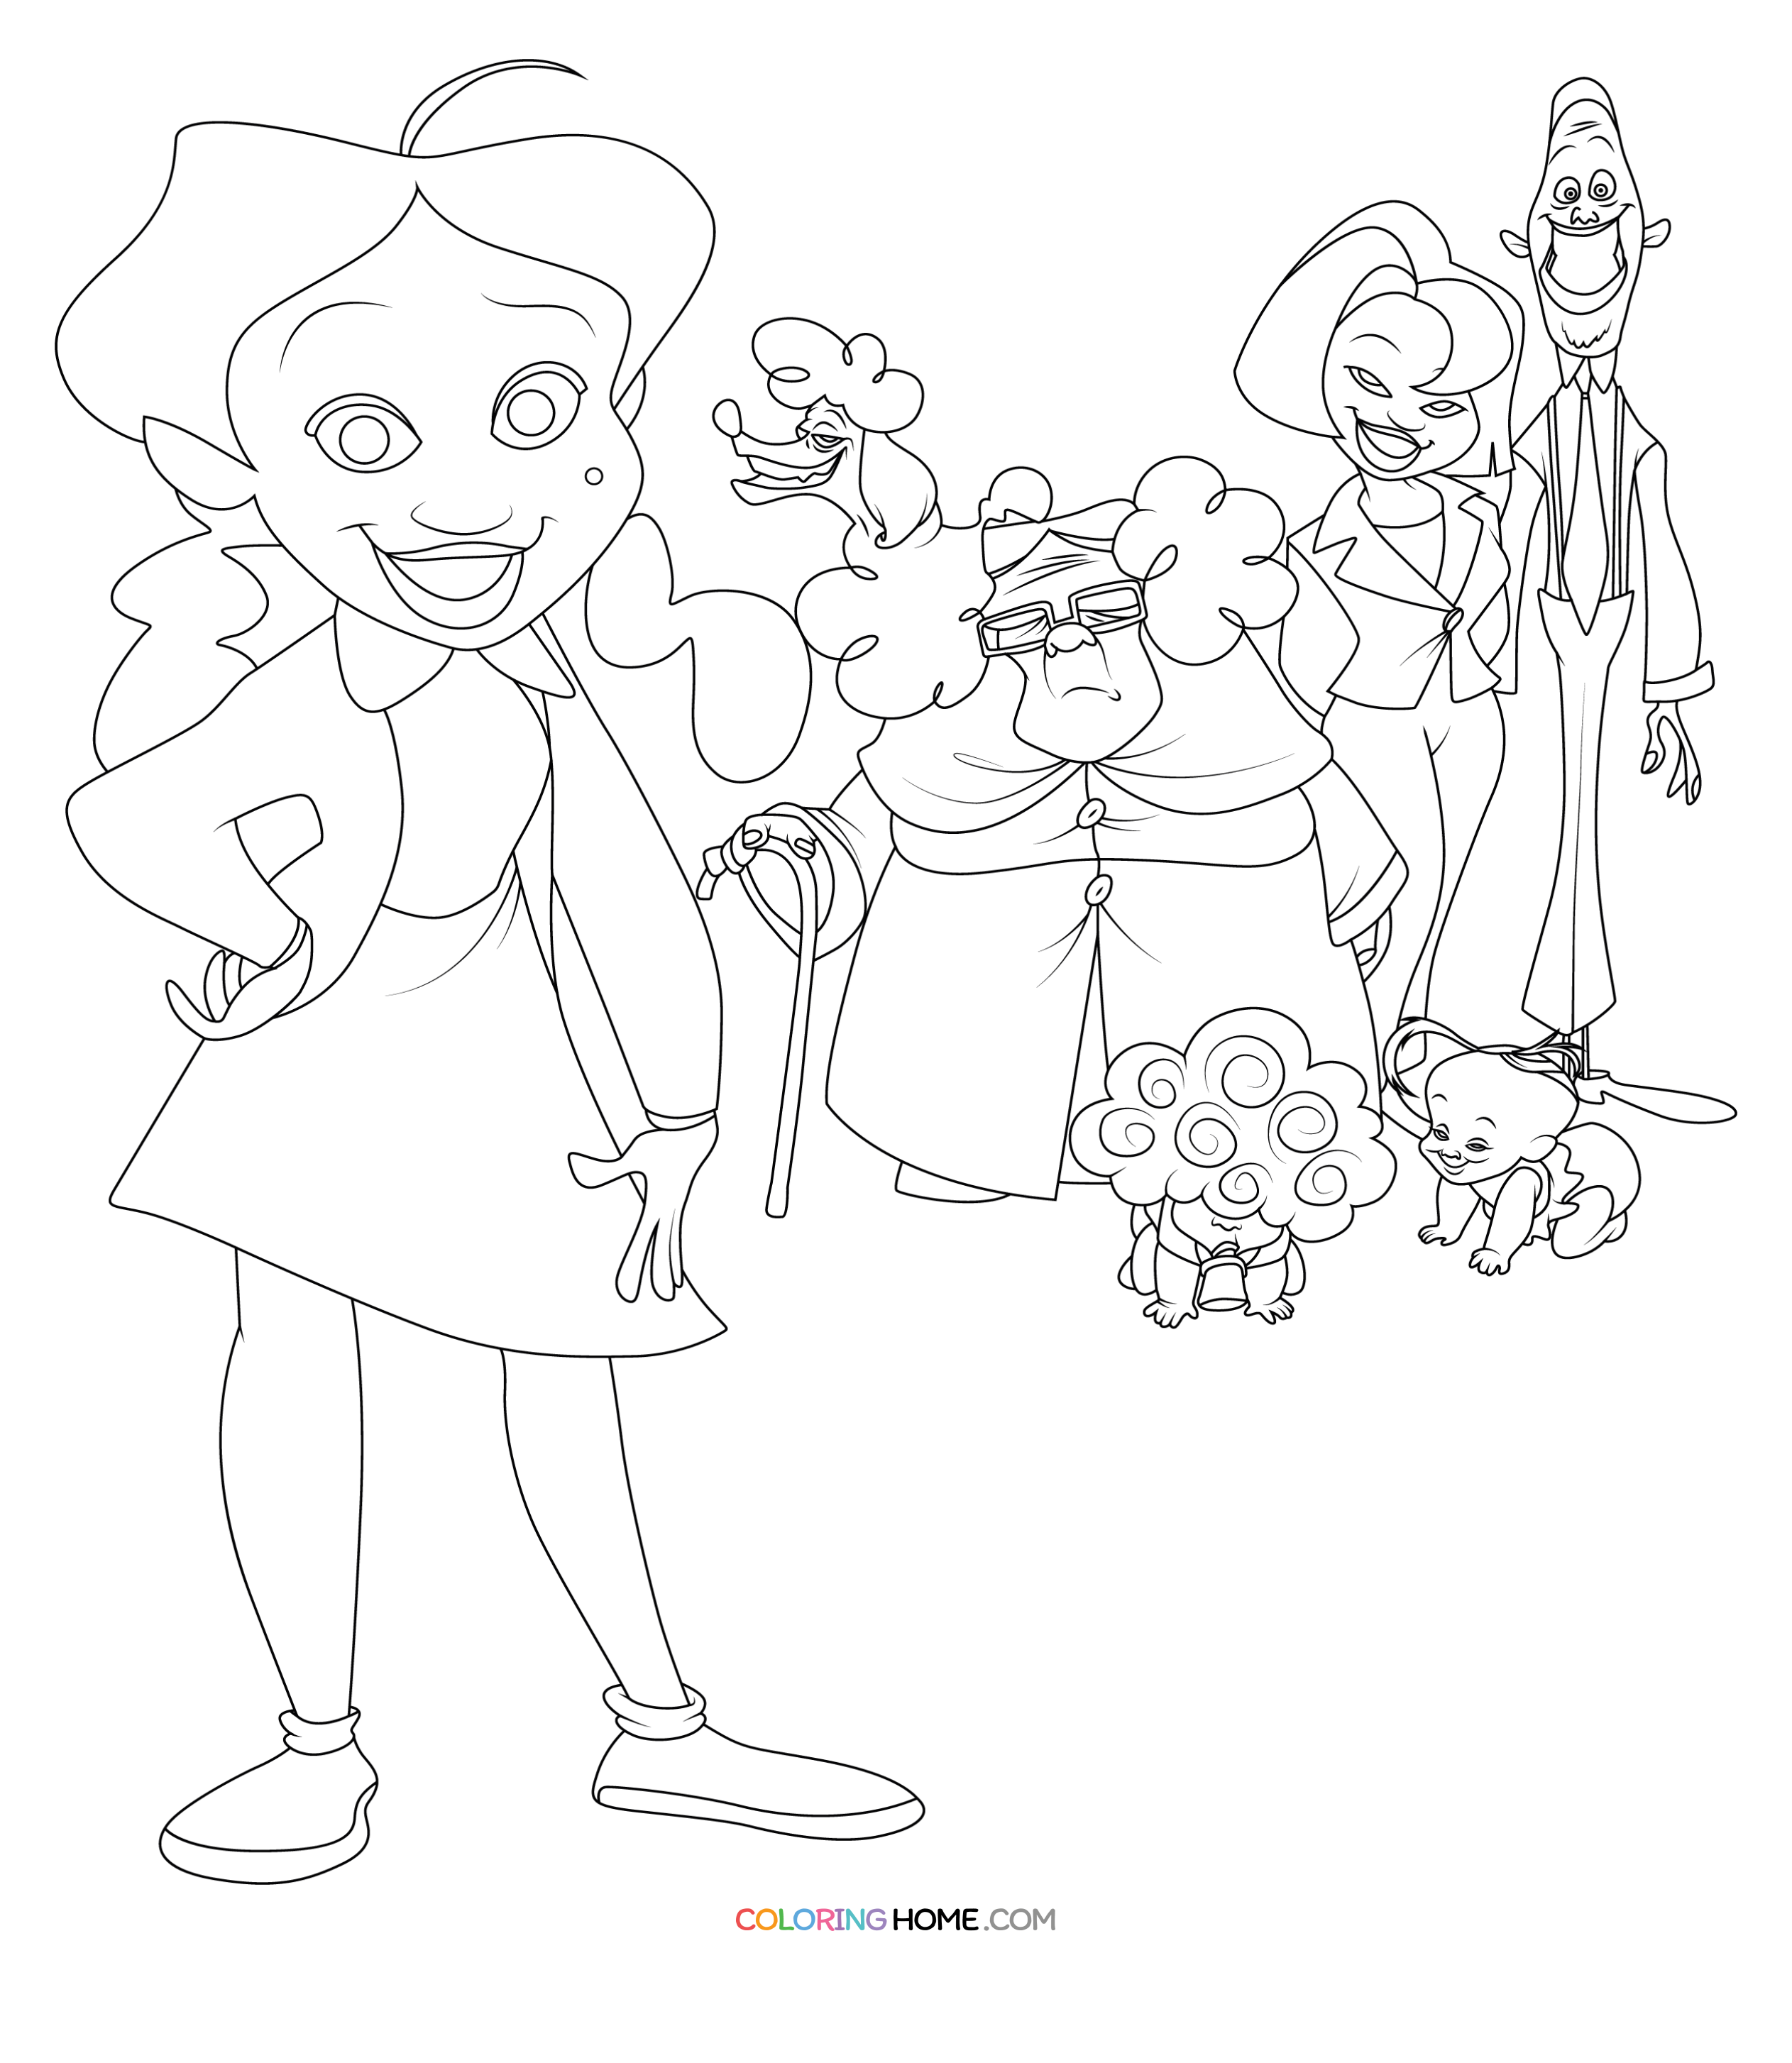 The Proud Family coloring page